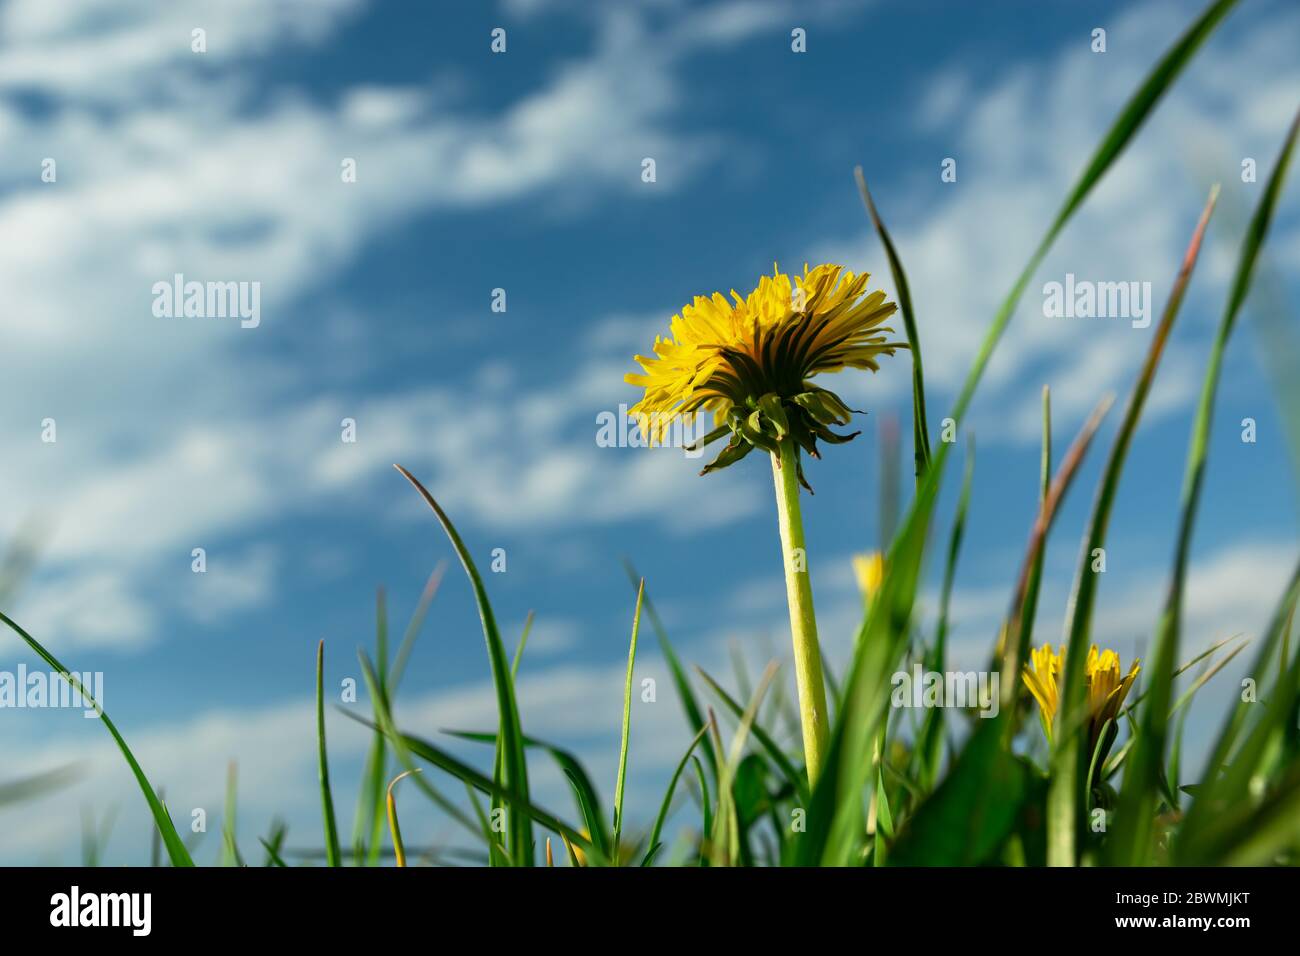 Yellow dandelion flower in green grass, white clouds on a blue sky, sunny spring day Stock Photo